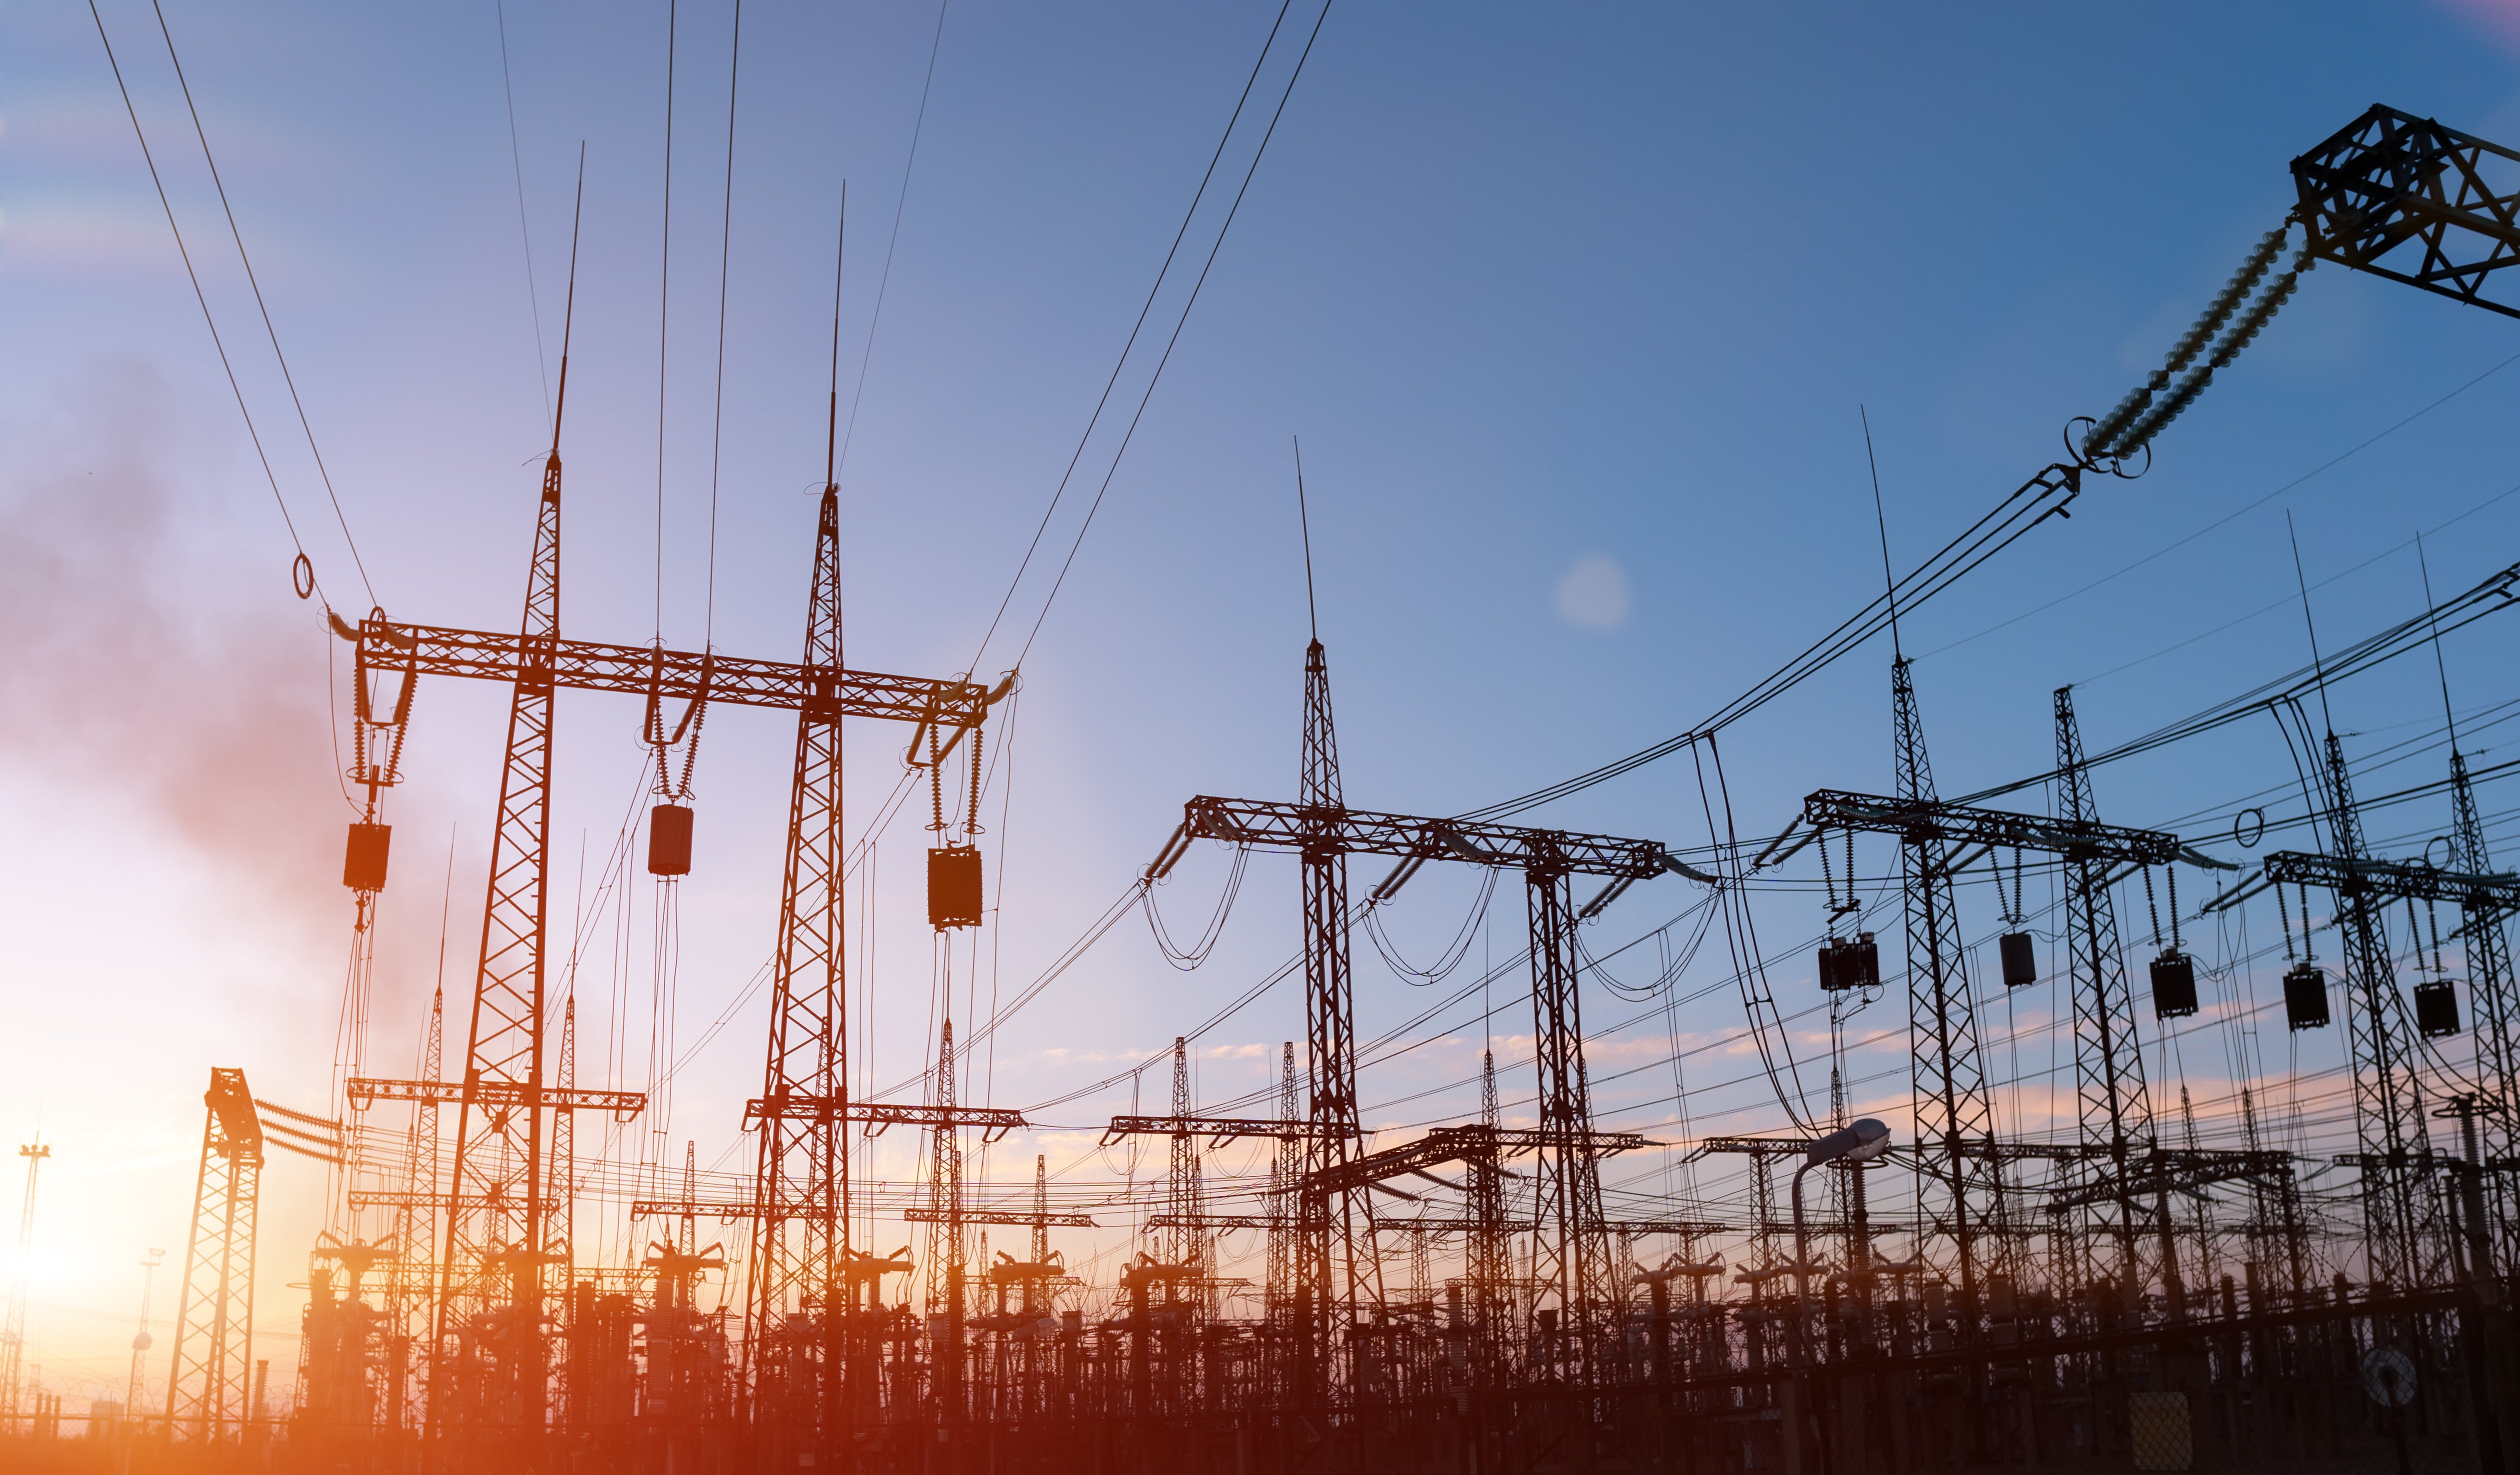 High-voltage power lines. Electricity distribution station. high voltage electric transmission tower. Distribution electric substation with power lines and transformers.